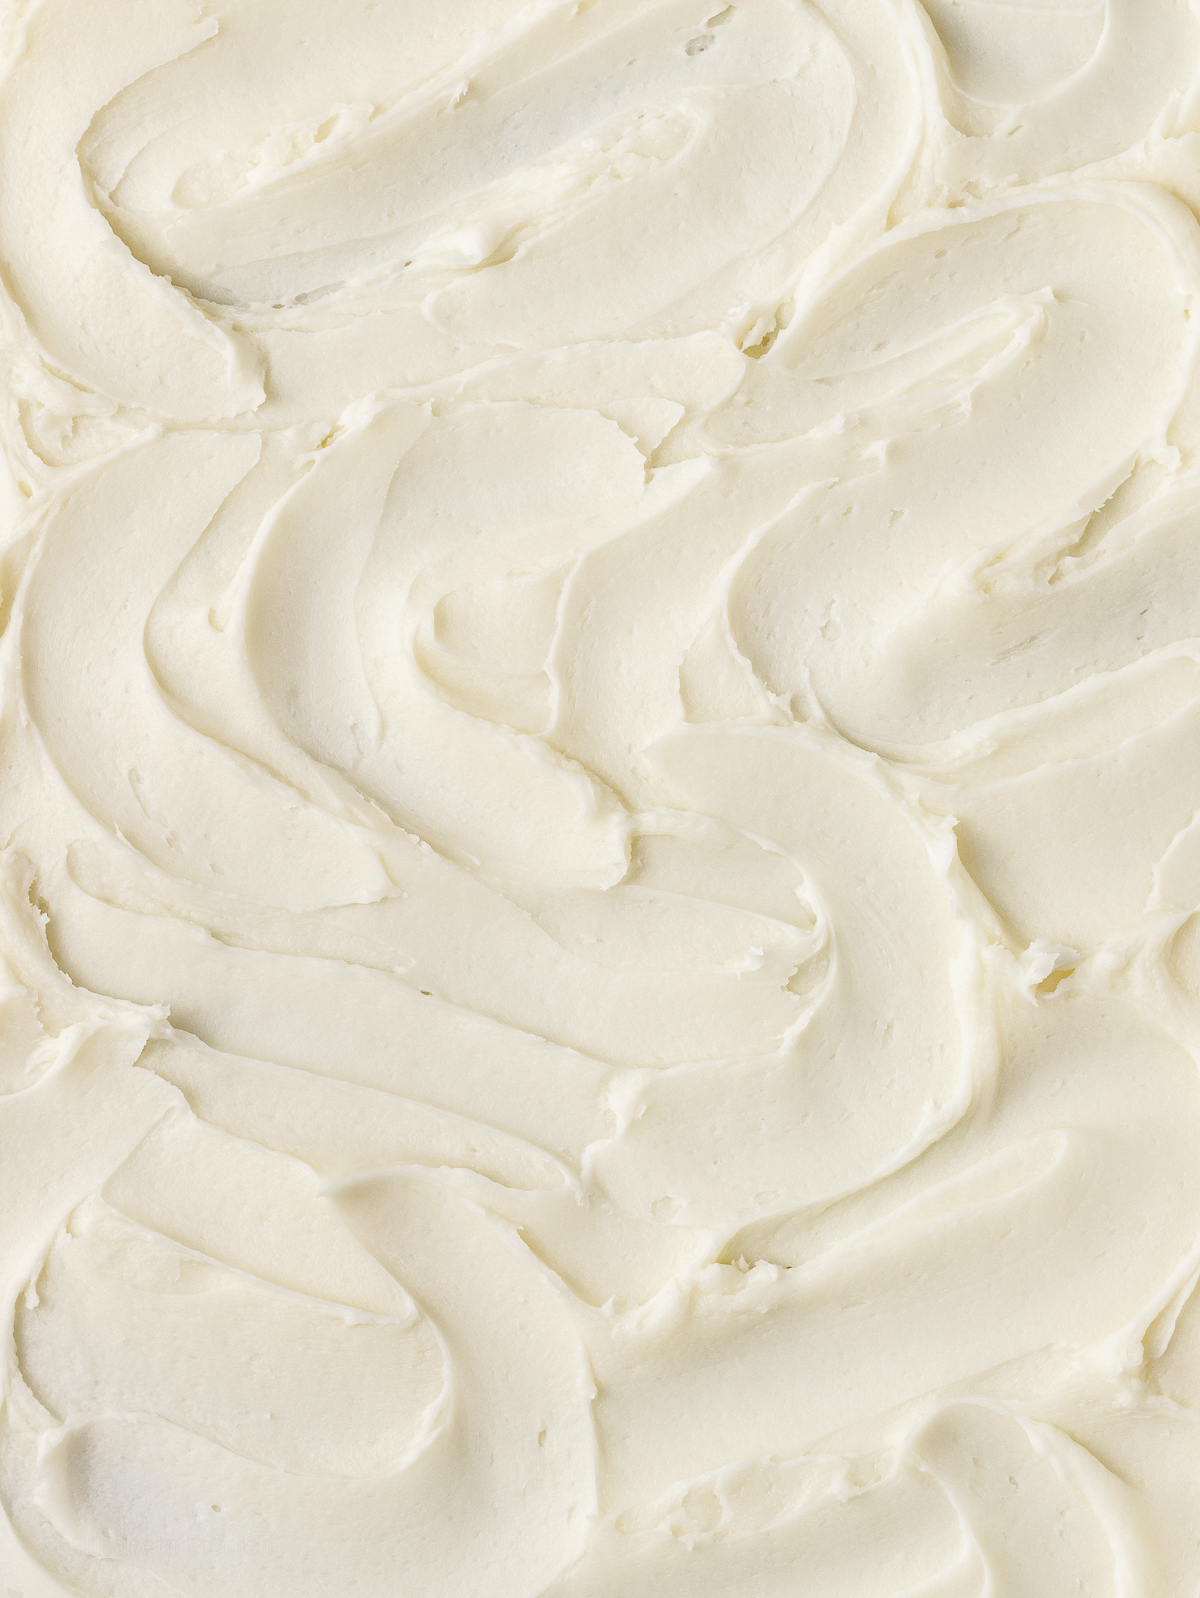 Swirls and swoops of Almond Buttercream Frosting.